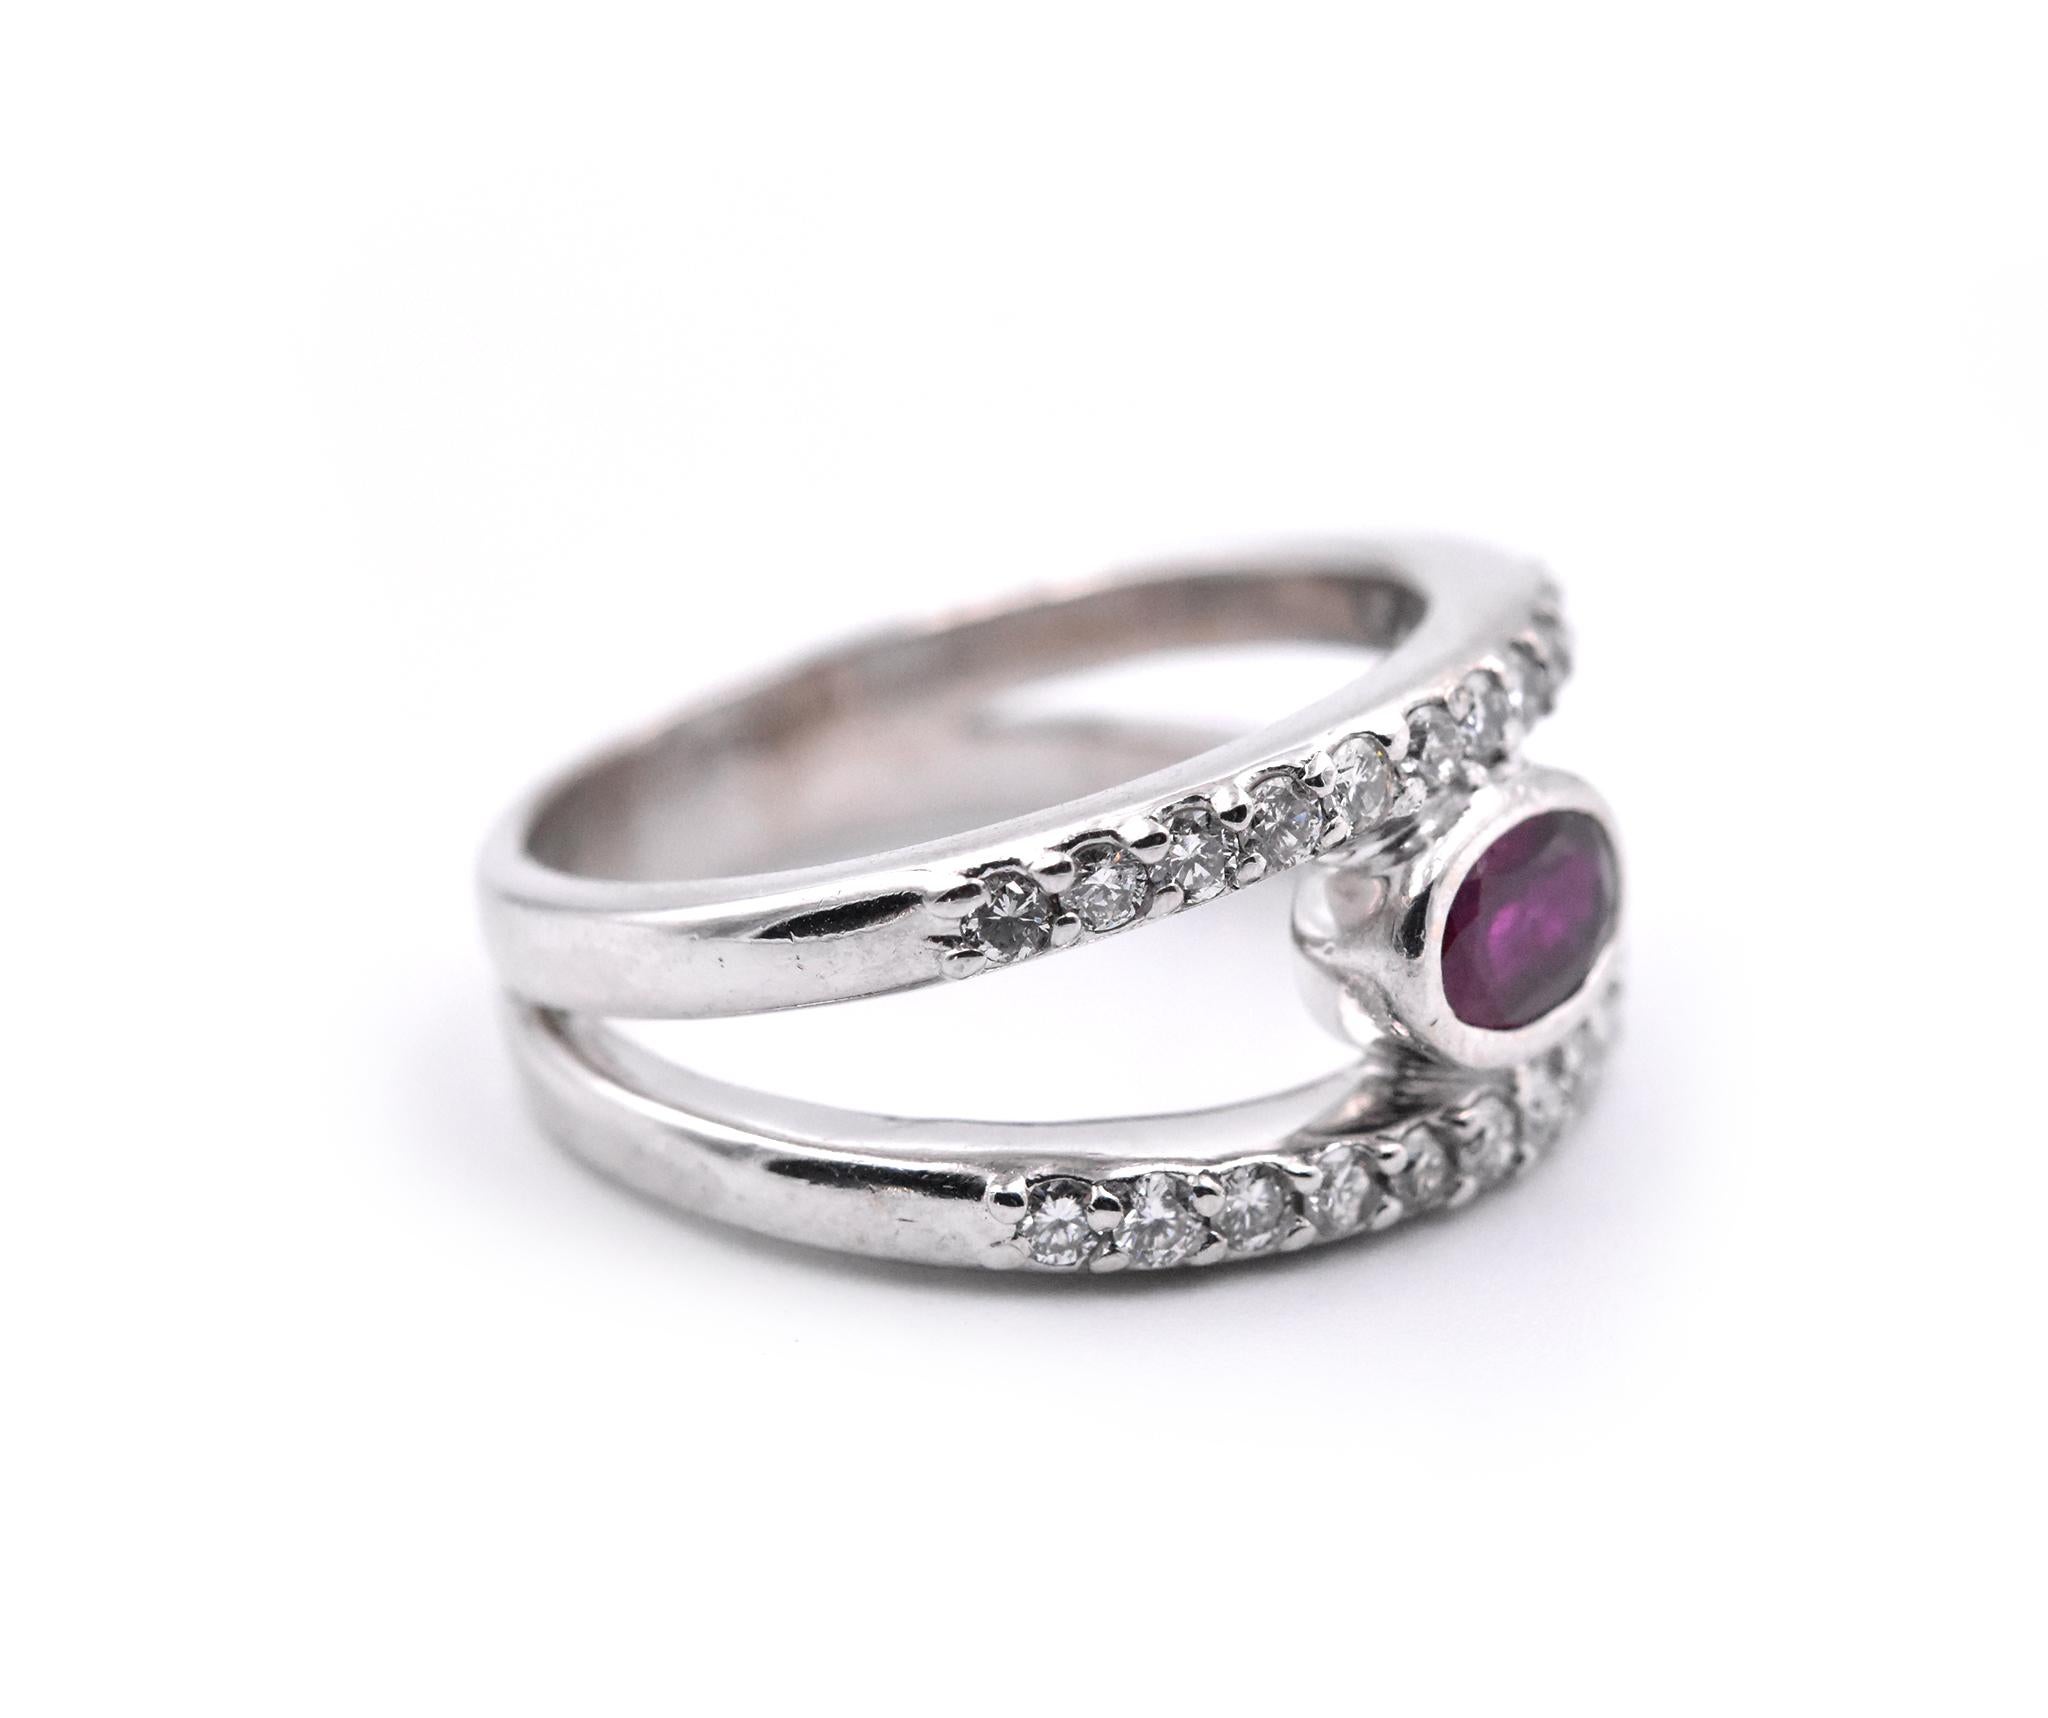 Designer: custom design
Material: 14k white gold
Center Stone: 1 oval cut ruby = 1.00ct
Diamonds: 26 round cuts = .54cttw
Color: H
Clarity: VS2-SI1
Ring Size: 7 1/4 (please allow two additional shipping days for sizing requests)
Dimensions: ring